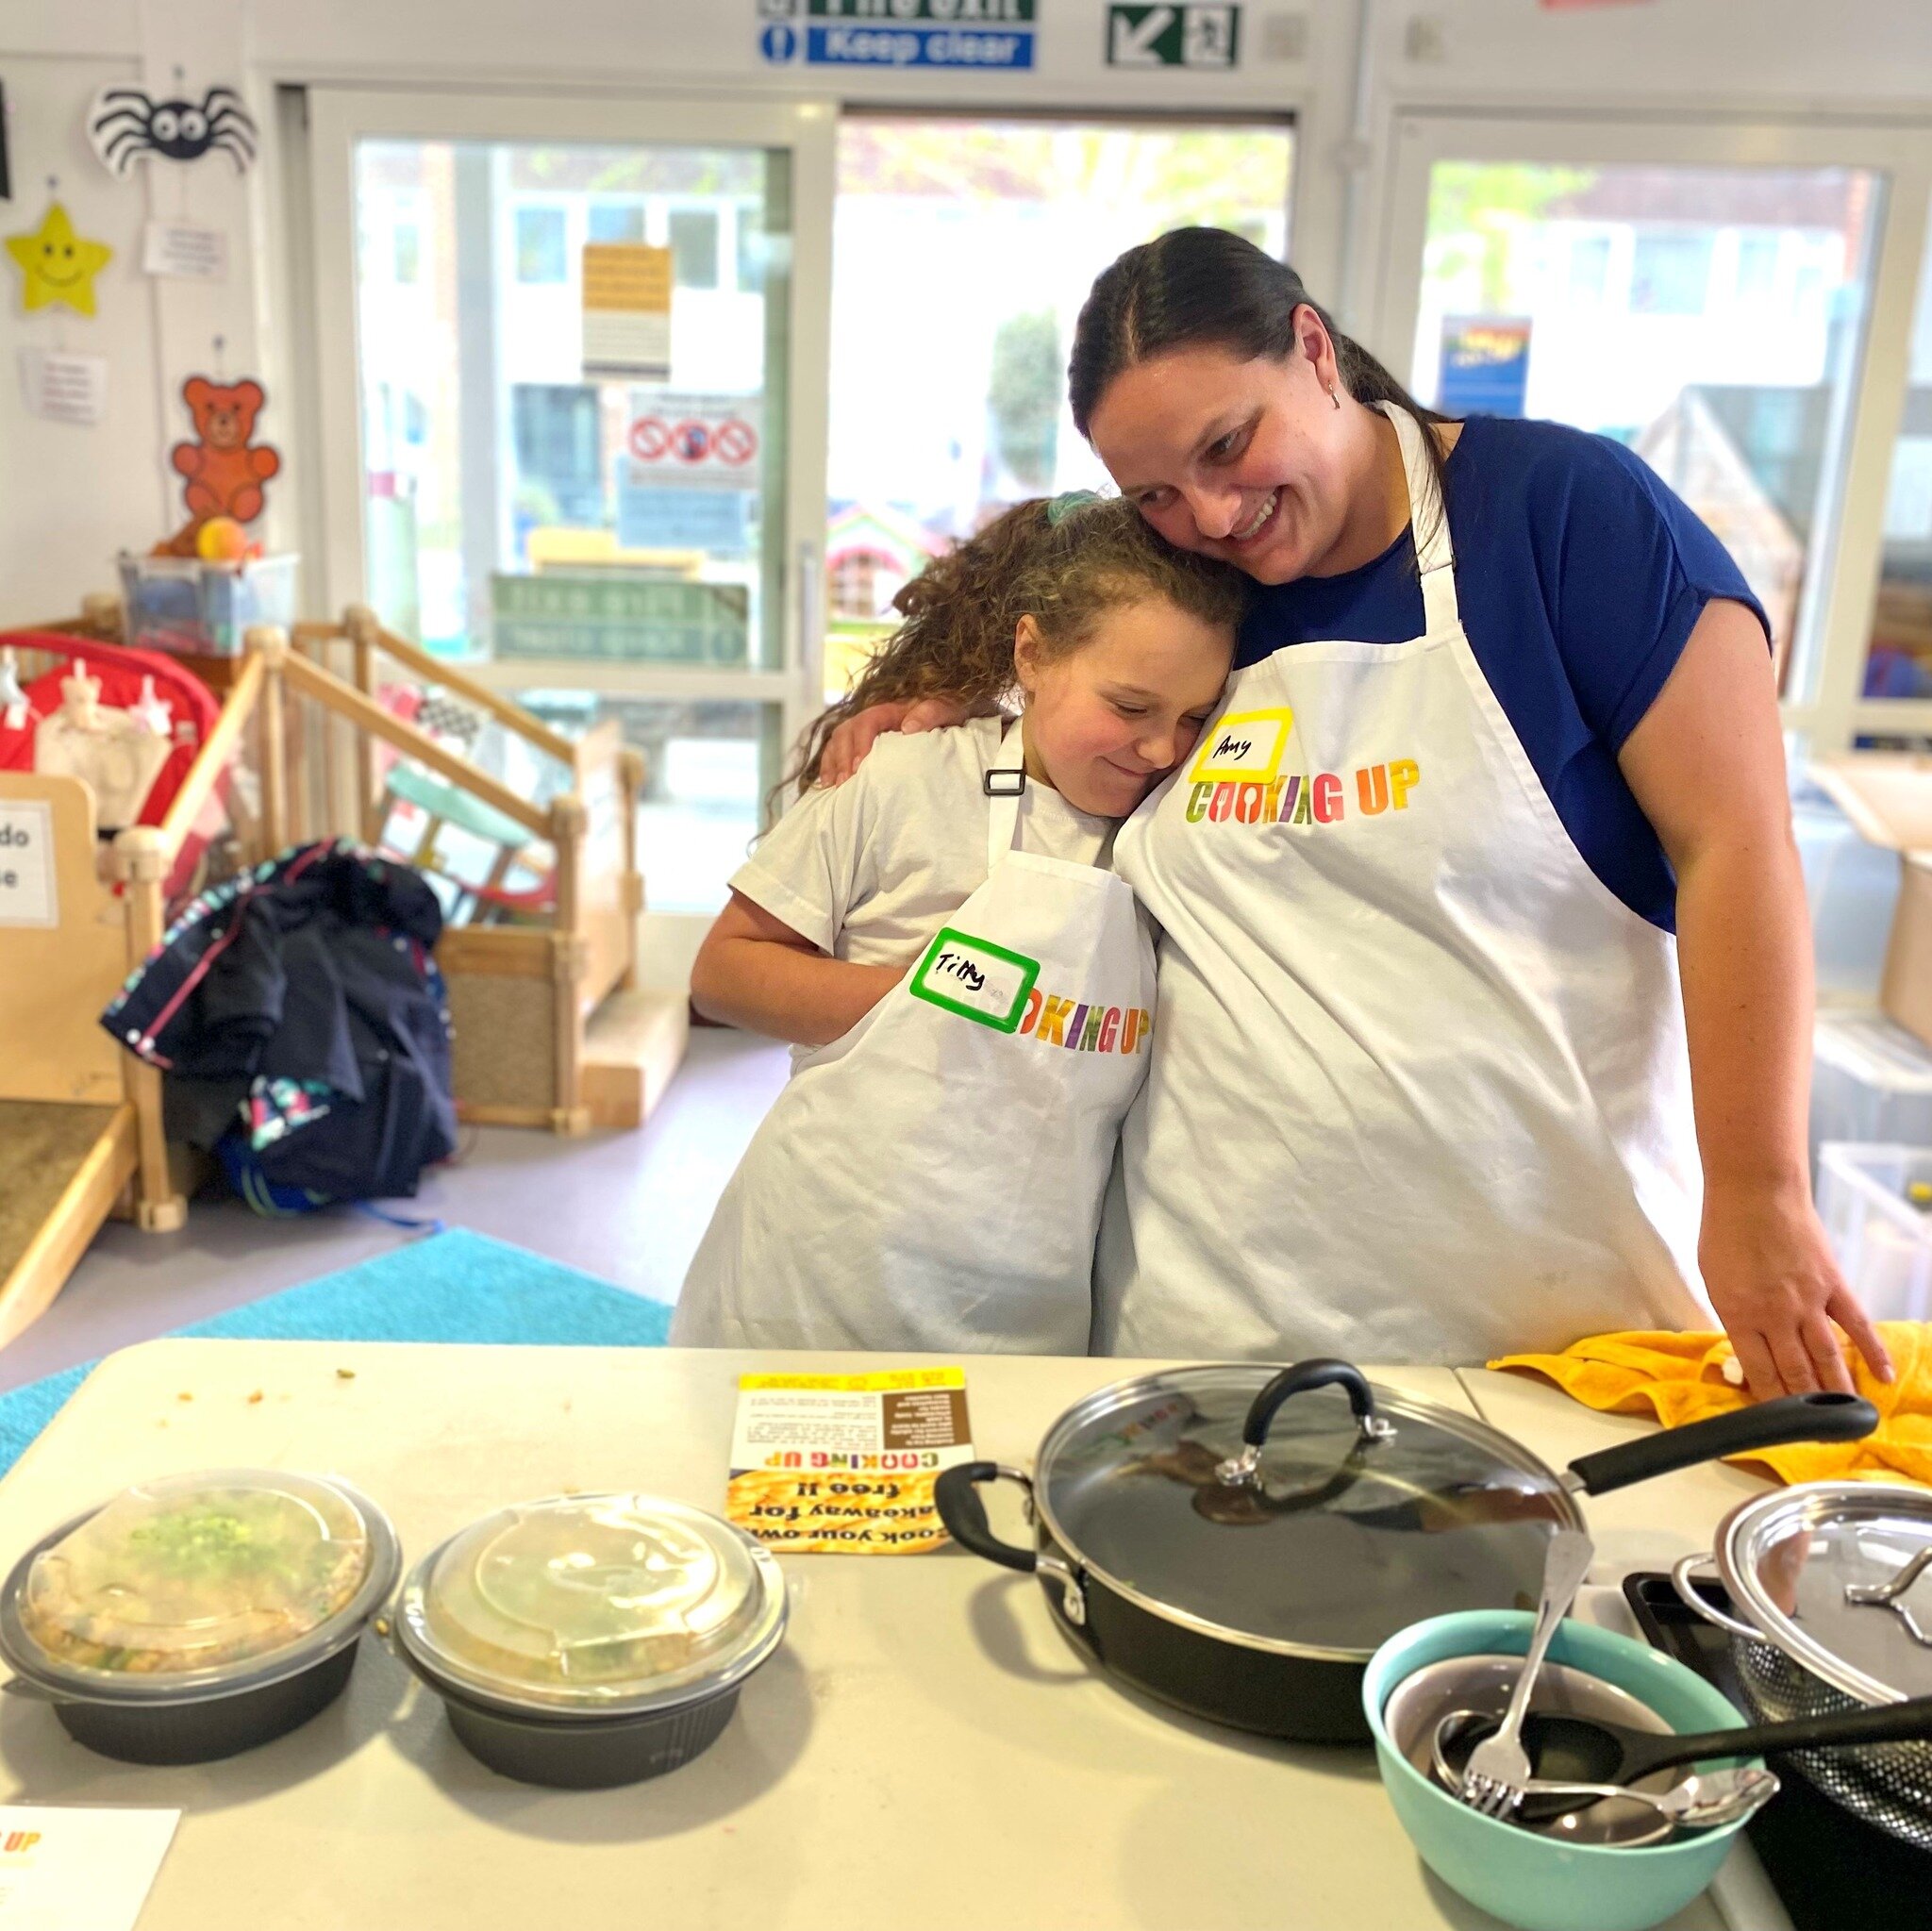 Earlier this week at Ham Children's Centre, we worked with three families to help them prepare a delicious veggie fried rice meal to take home.

It was such a lovely afternoon and we hope everyone enjoyed themselves.

Leo (future food critic in train